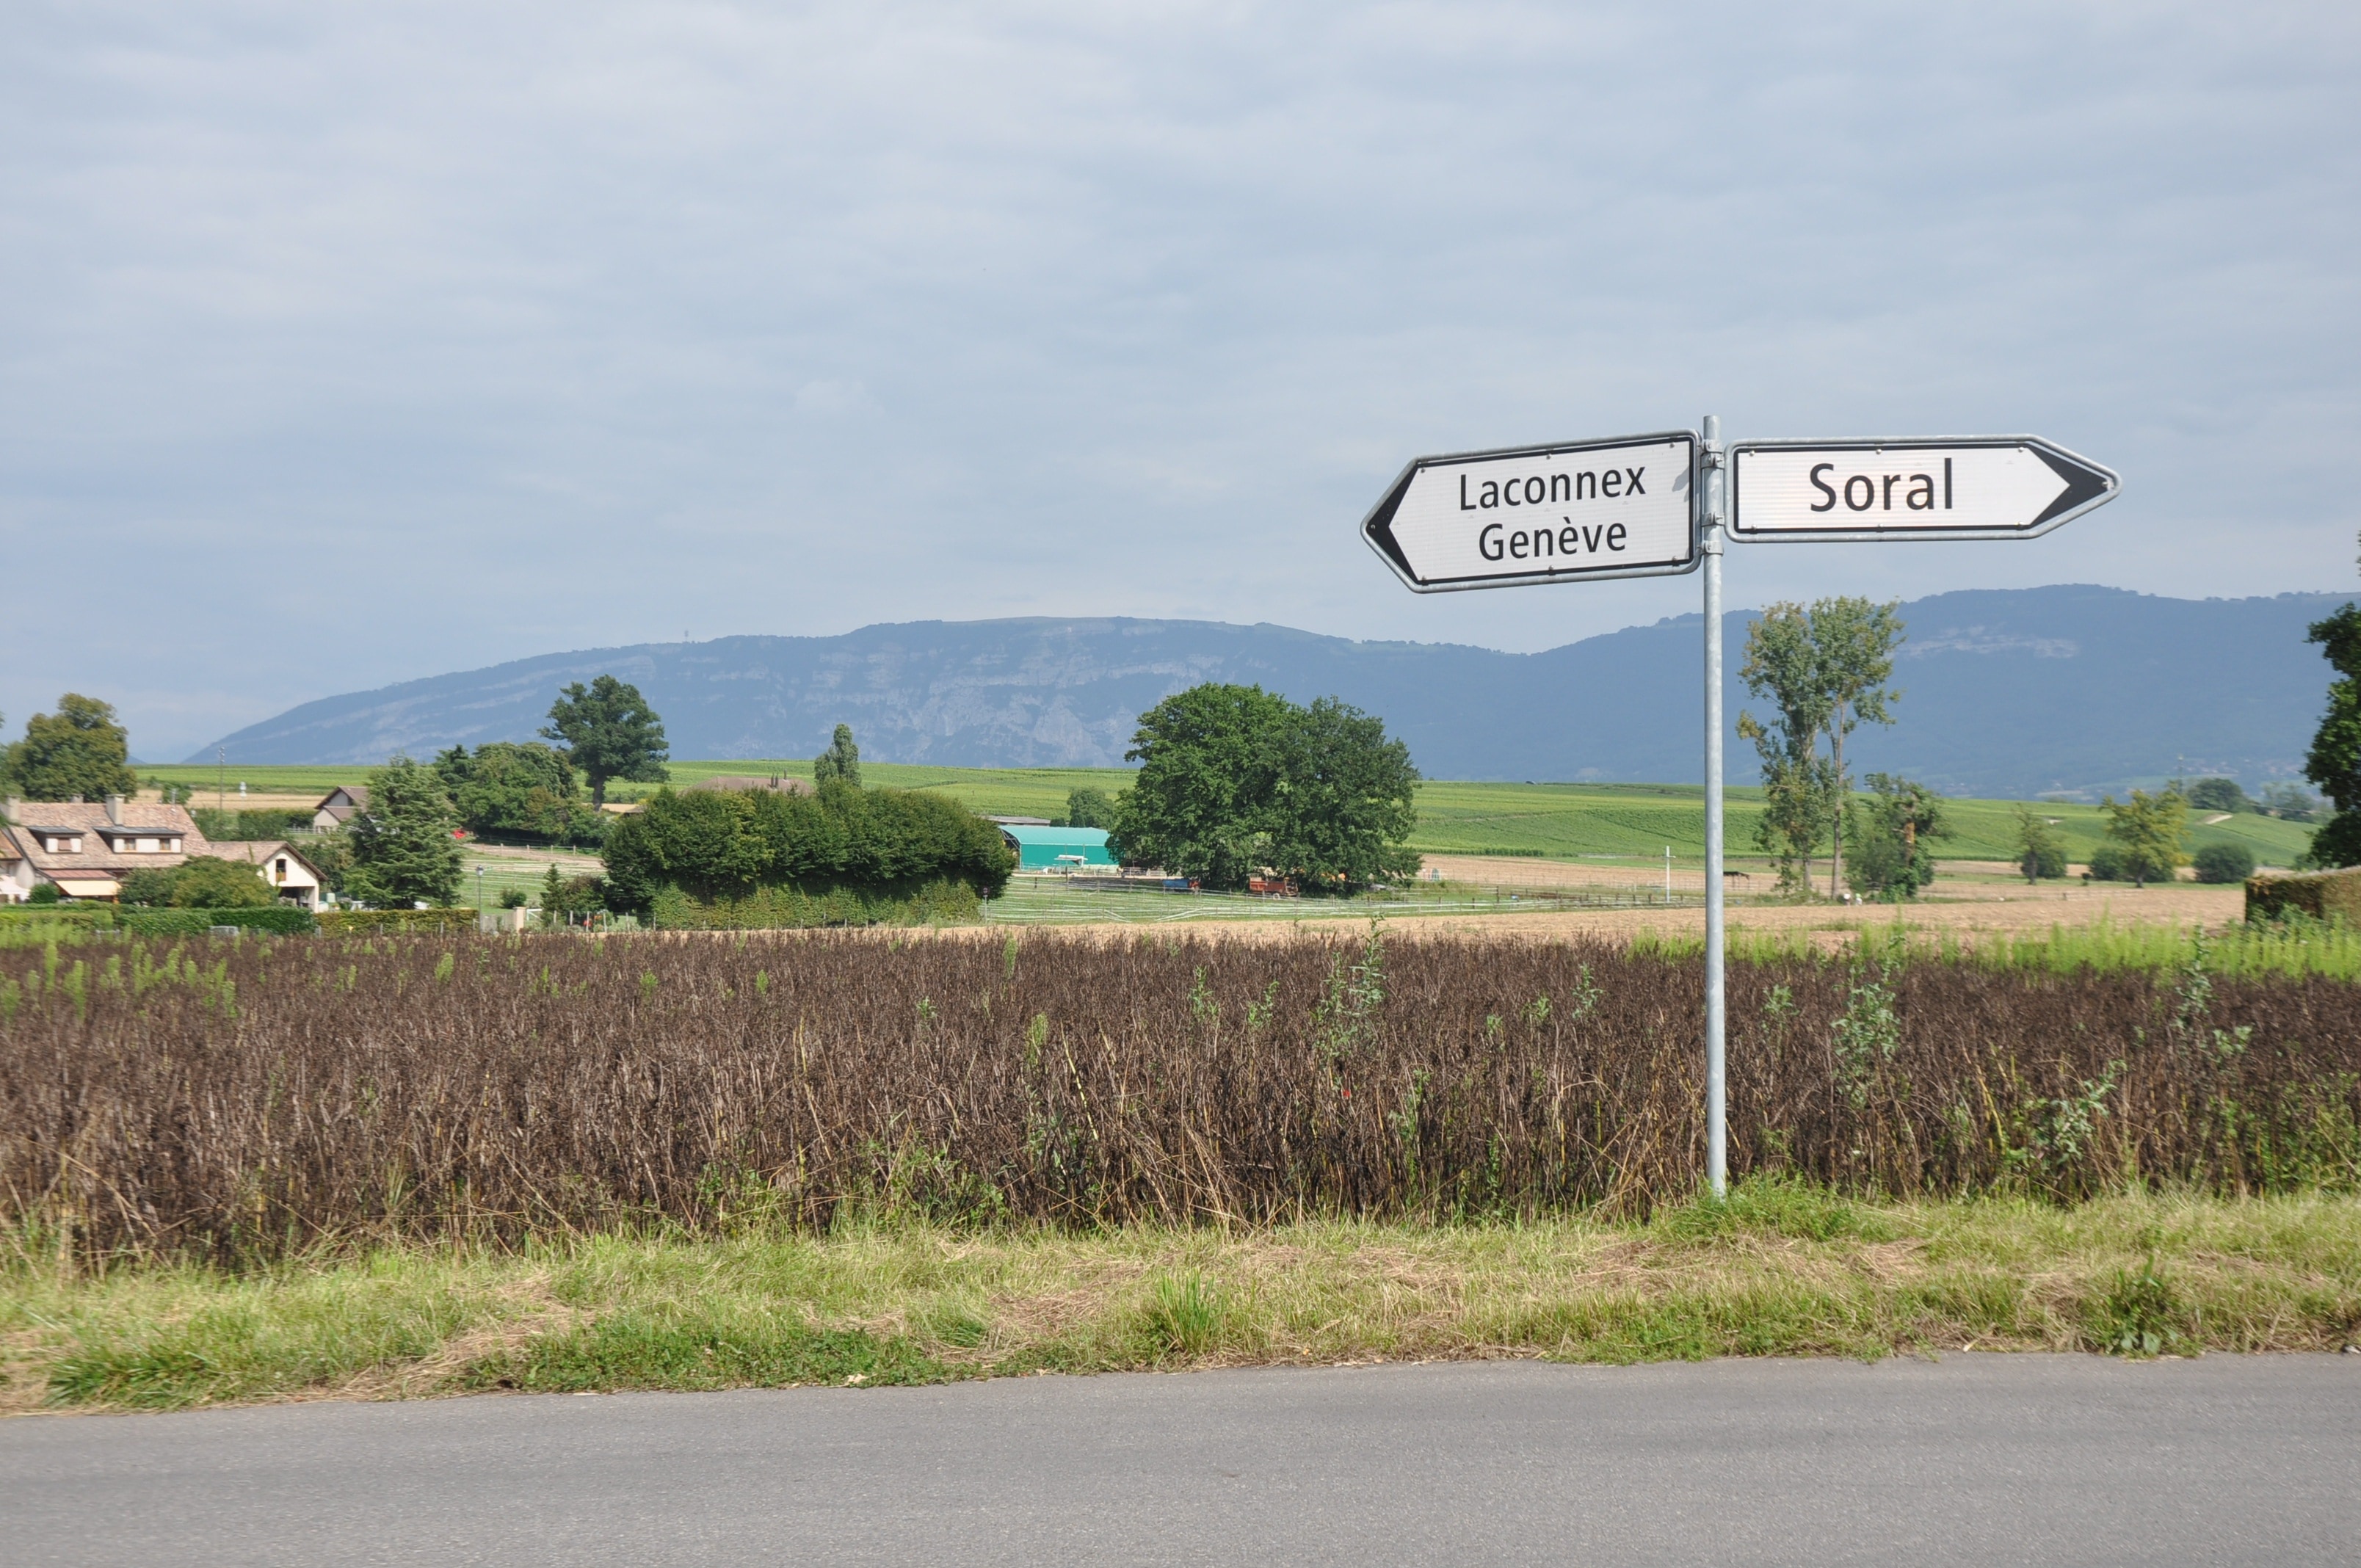 laconnex geneve and soral road signage